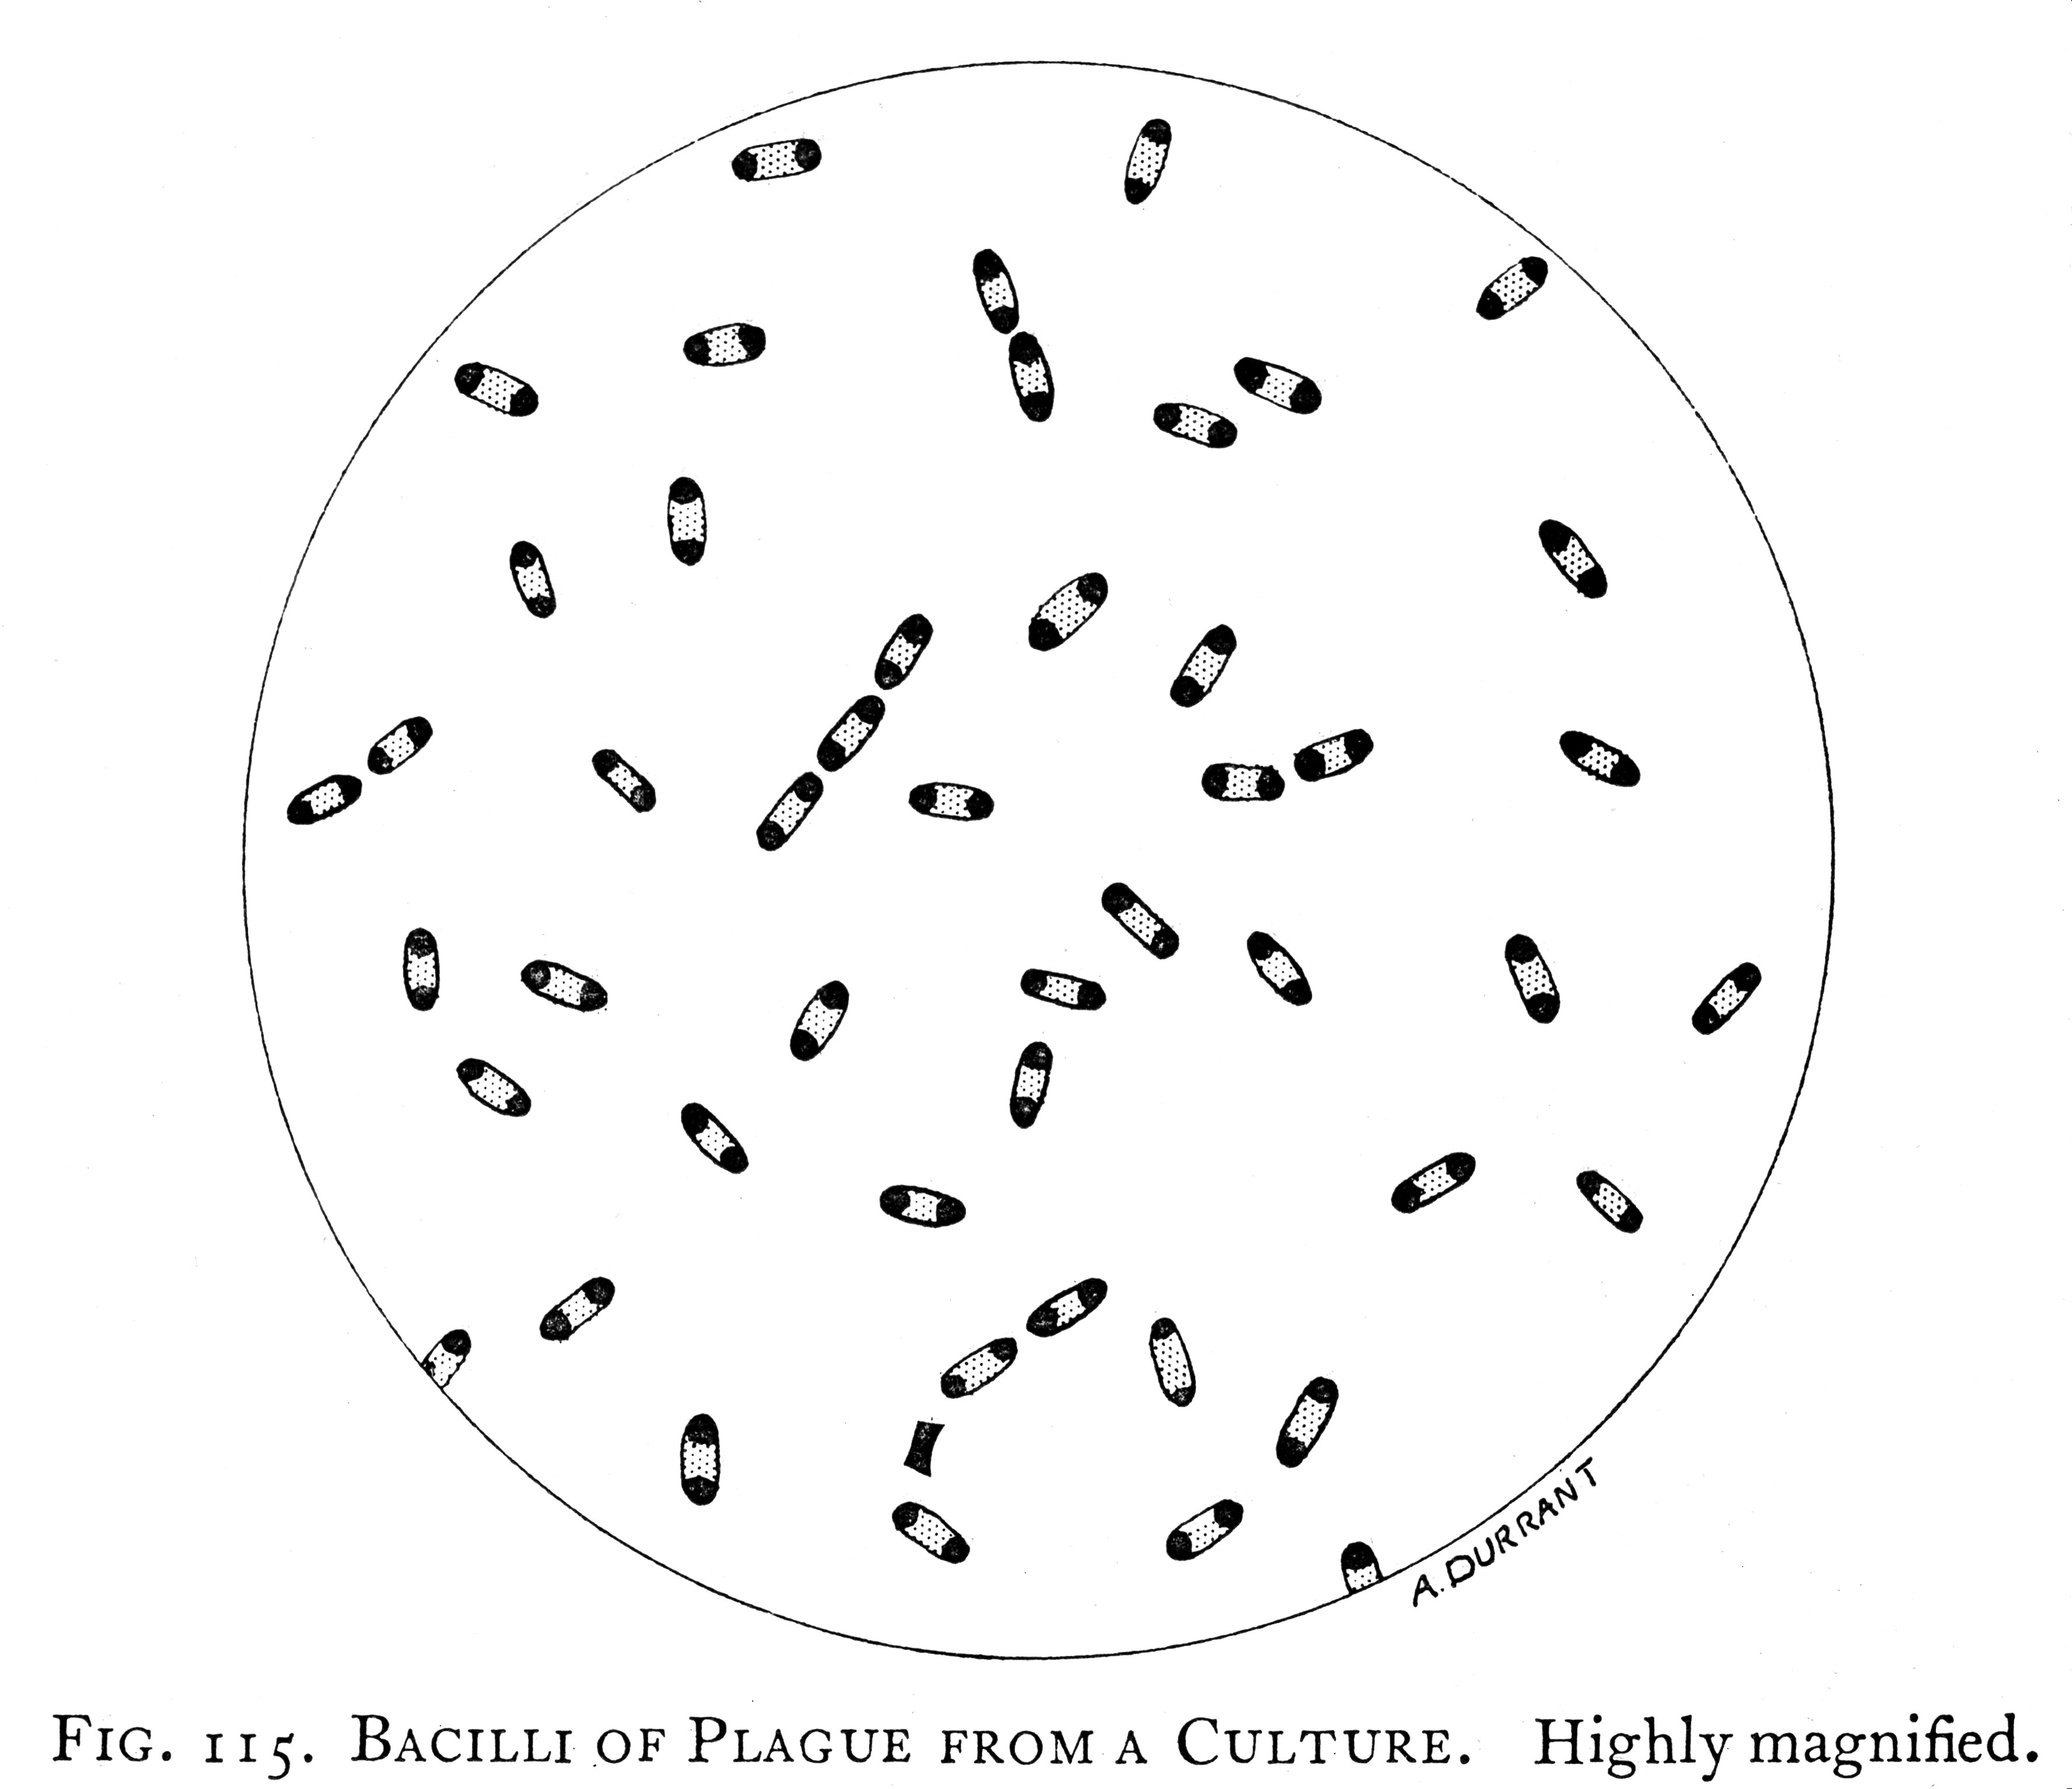 Bacilli of plague from a culture - diagram. Wellcome M0015723